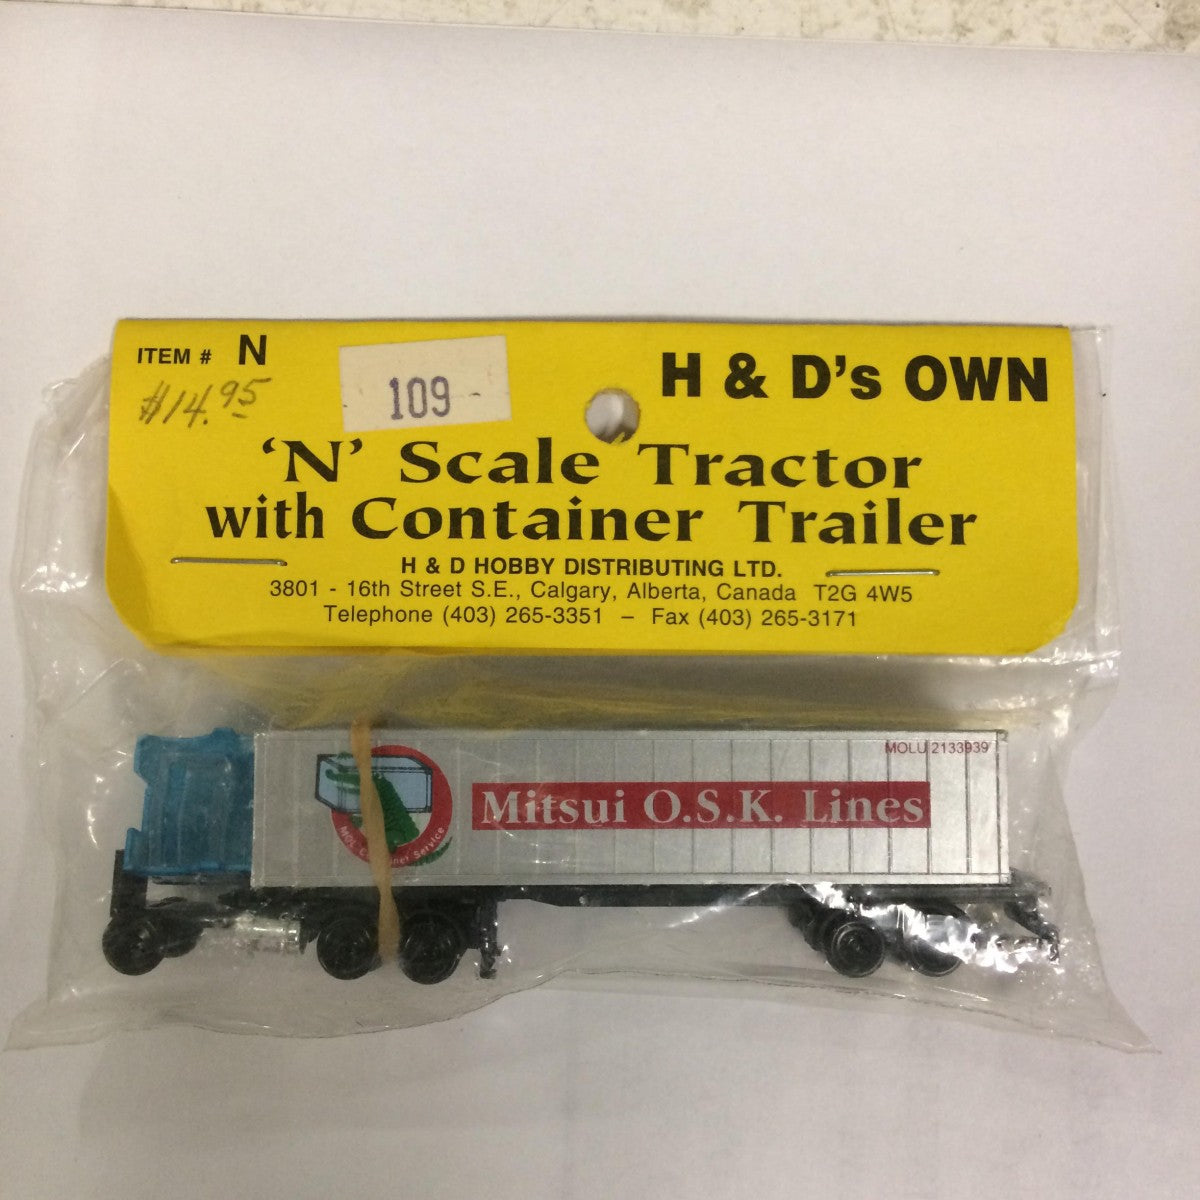 H & D Hobby Distributing 109 N Scale Tractor with Container Trailer